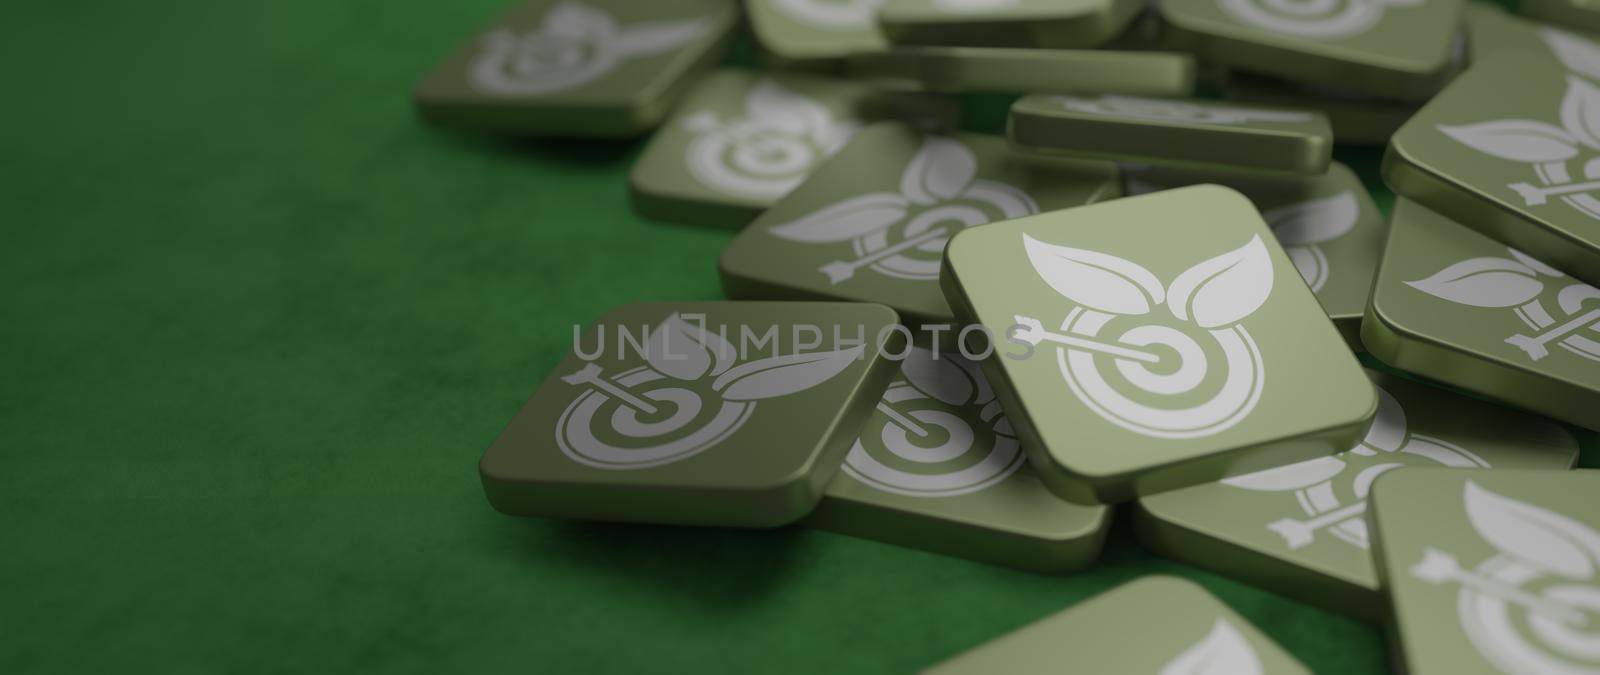 Eco sustainability goals in tiles Environment concept 3D